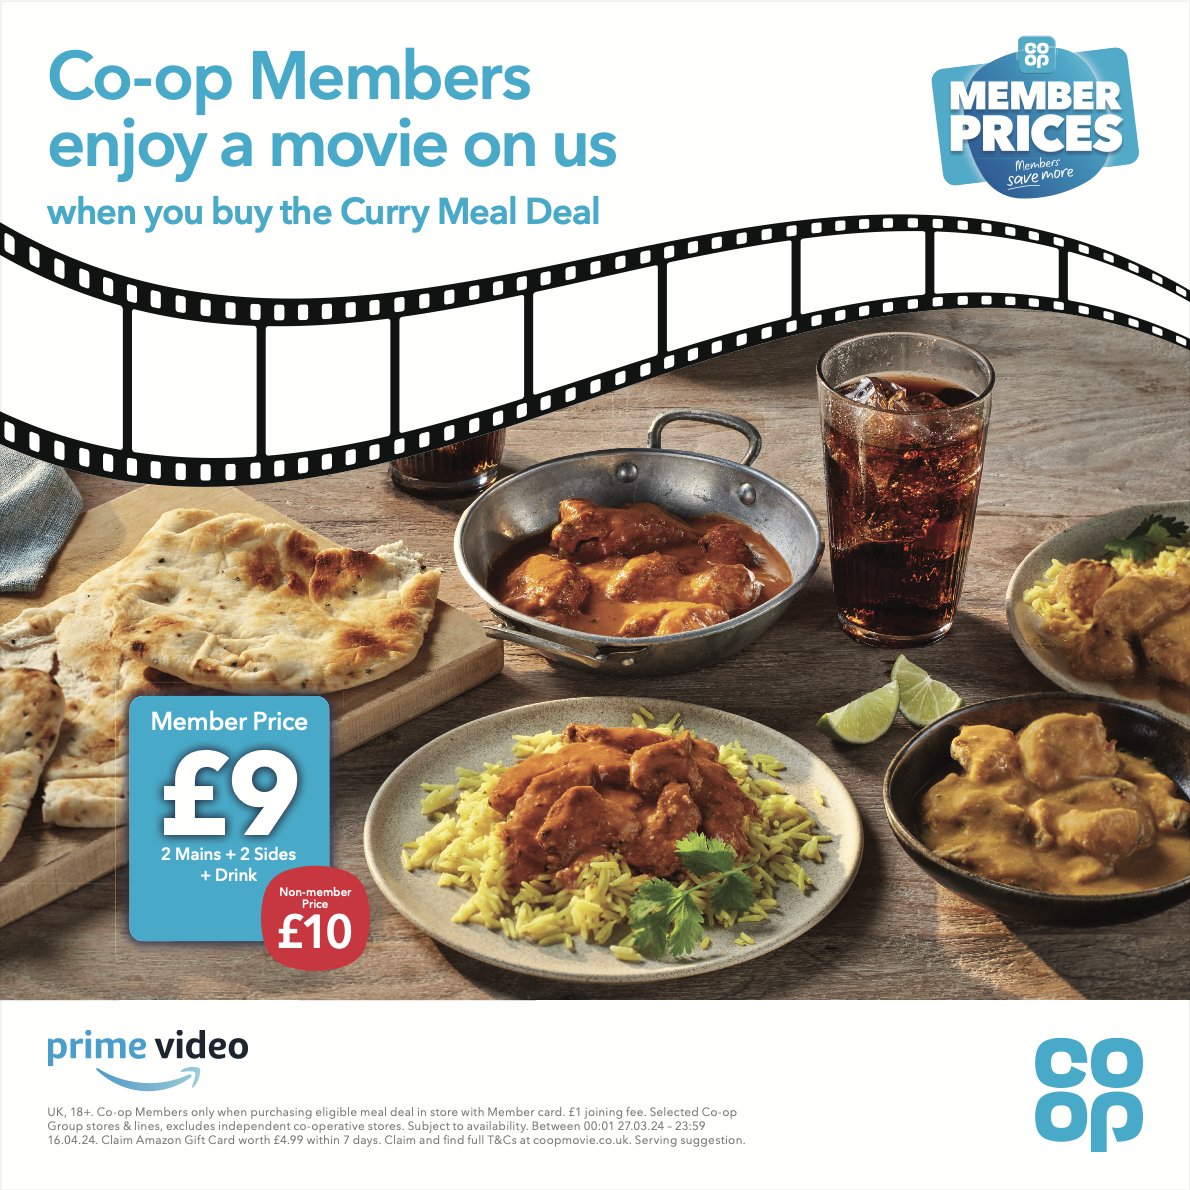 Co-op Members, grab the Curry Meal Deal in your local @coopuk store and enjoy a free movie on Amazon Prime 🥘 🎥 Find out more 👉 coop.co.uk/products/deals….